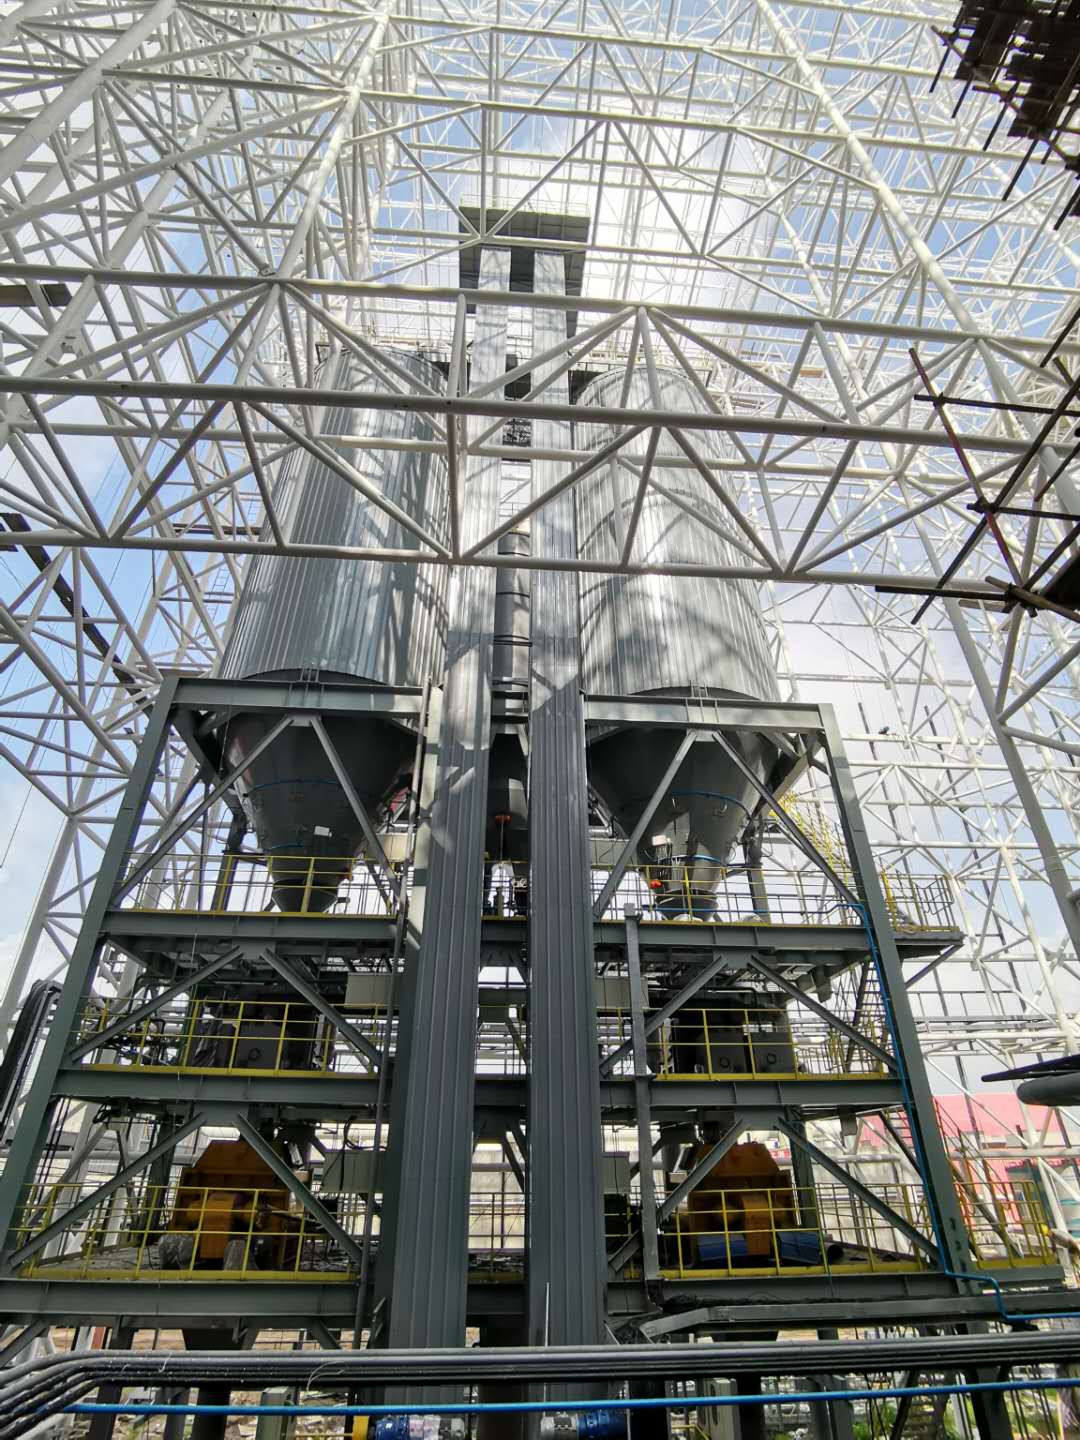 What is chain bucket elevator?